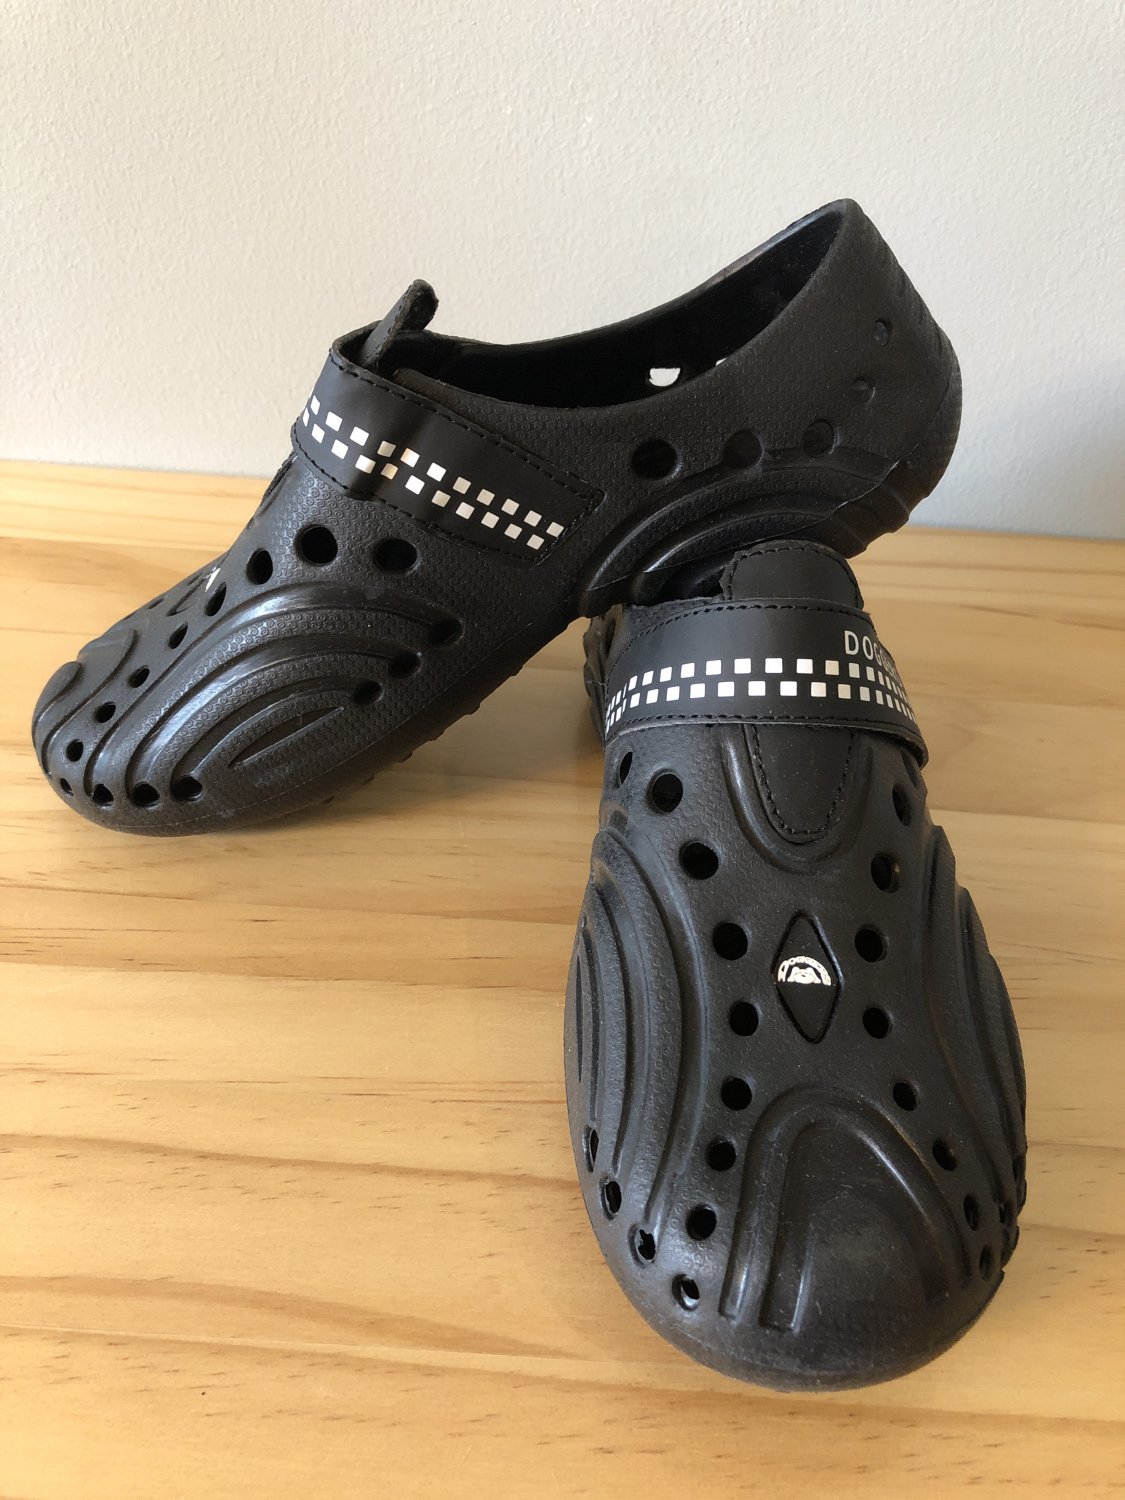 Doggers Ultralite Black Shoes Womens 5/6